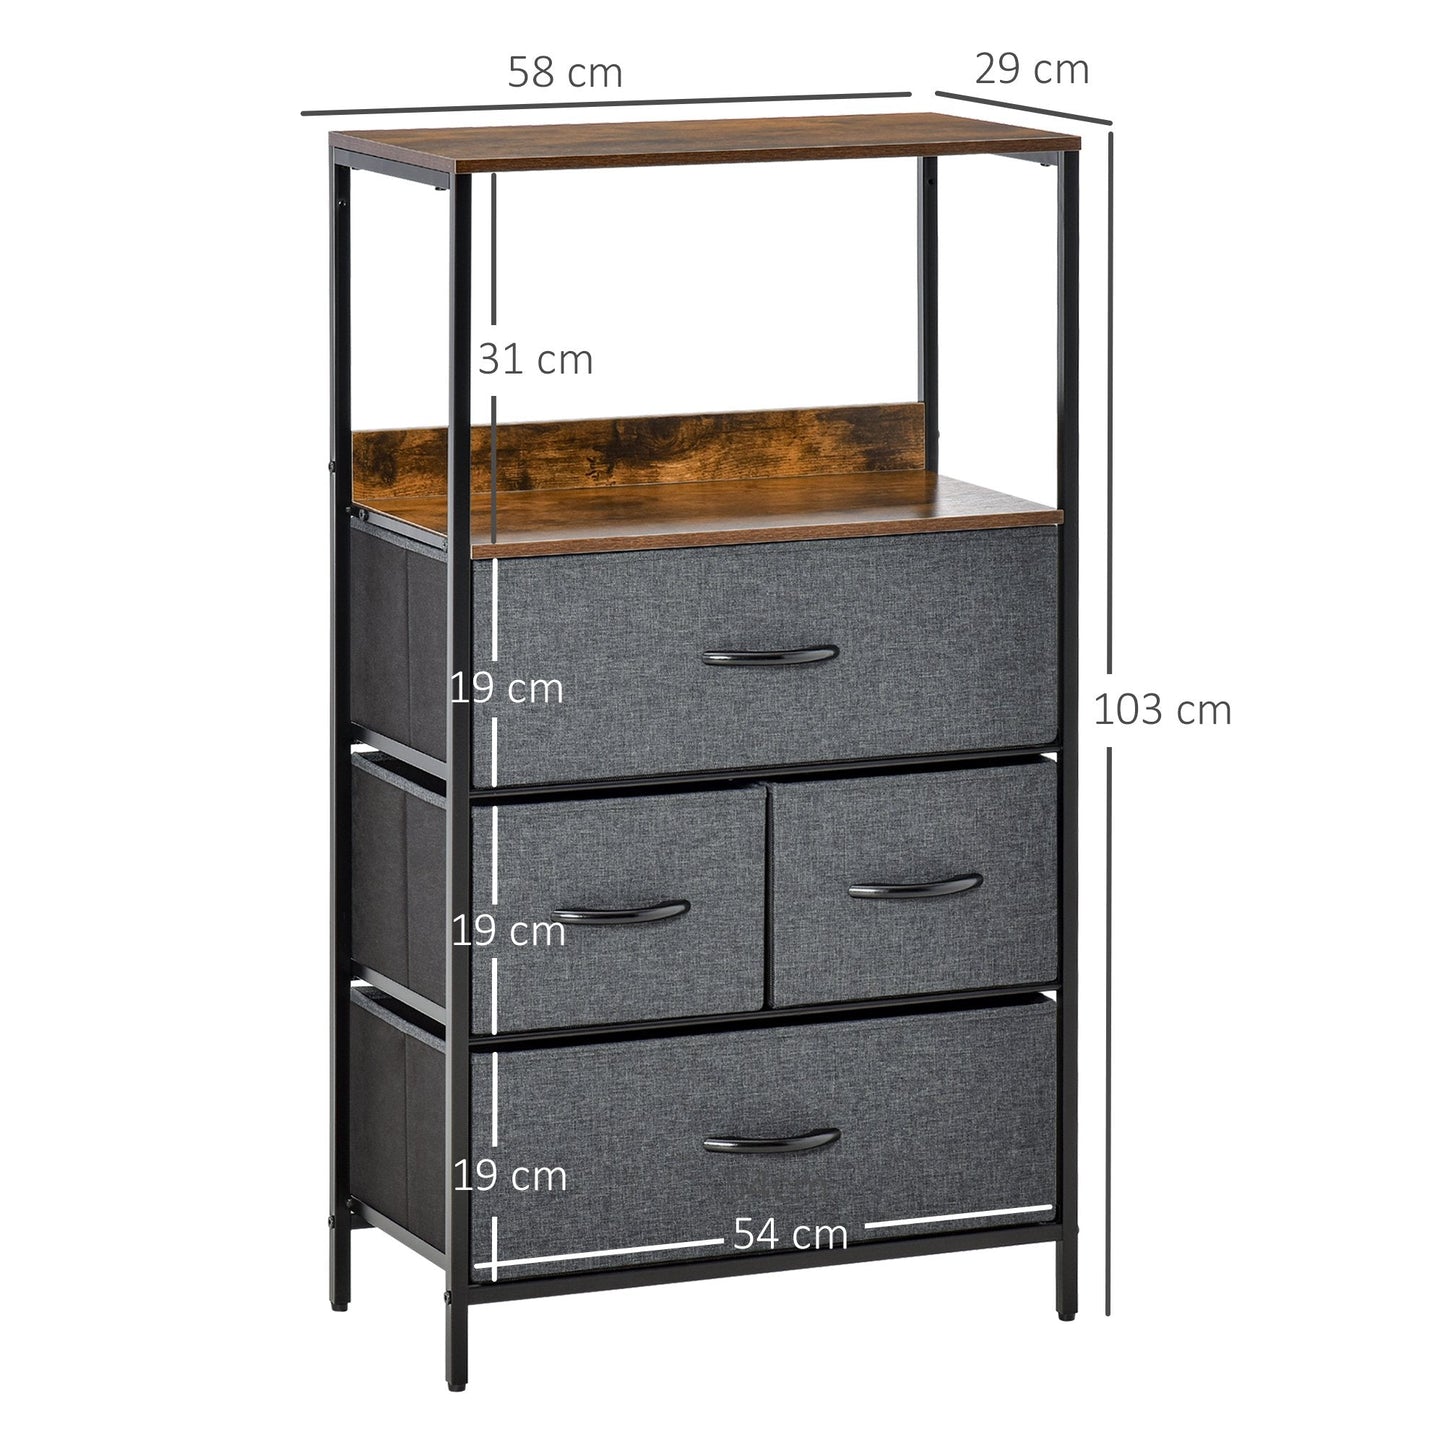 4 Drawer Storage Chest Unit with Shelves and Fabric Drawers - Black